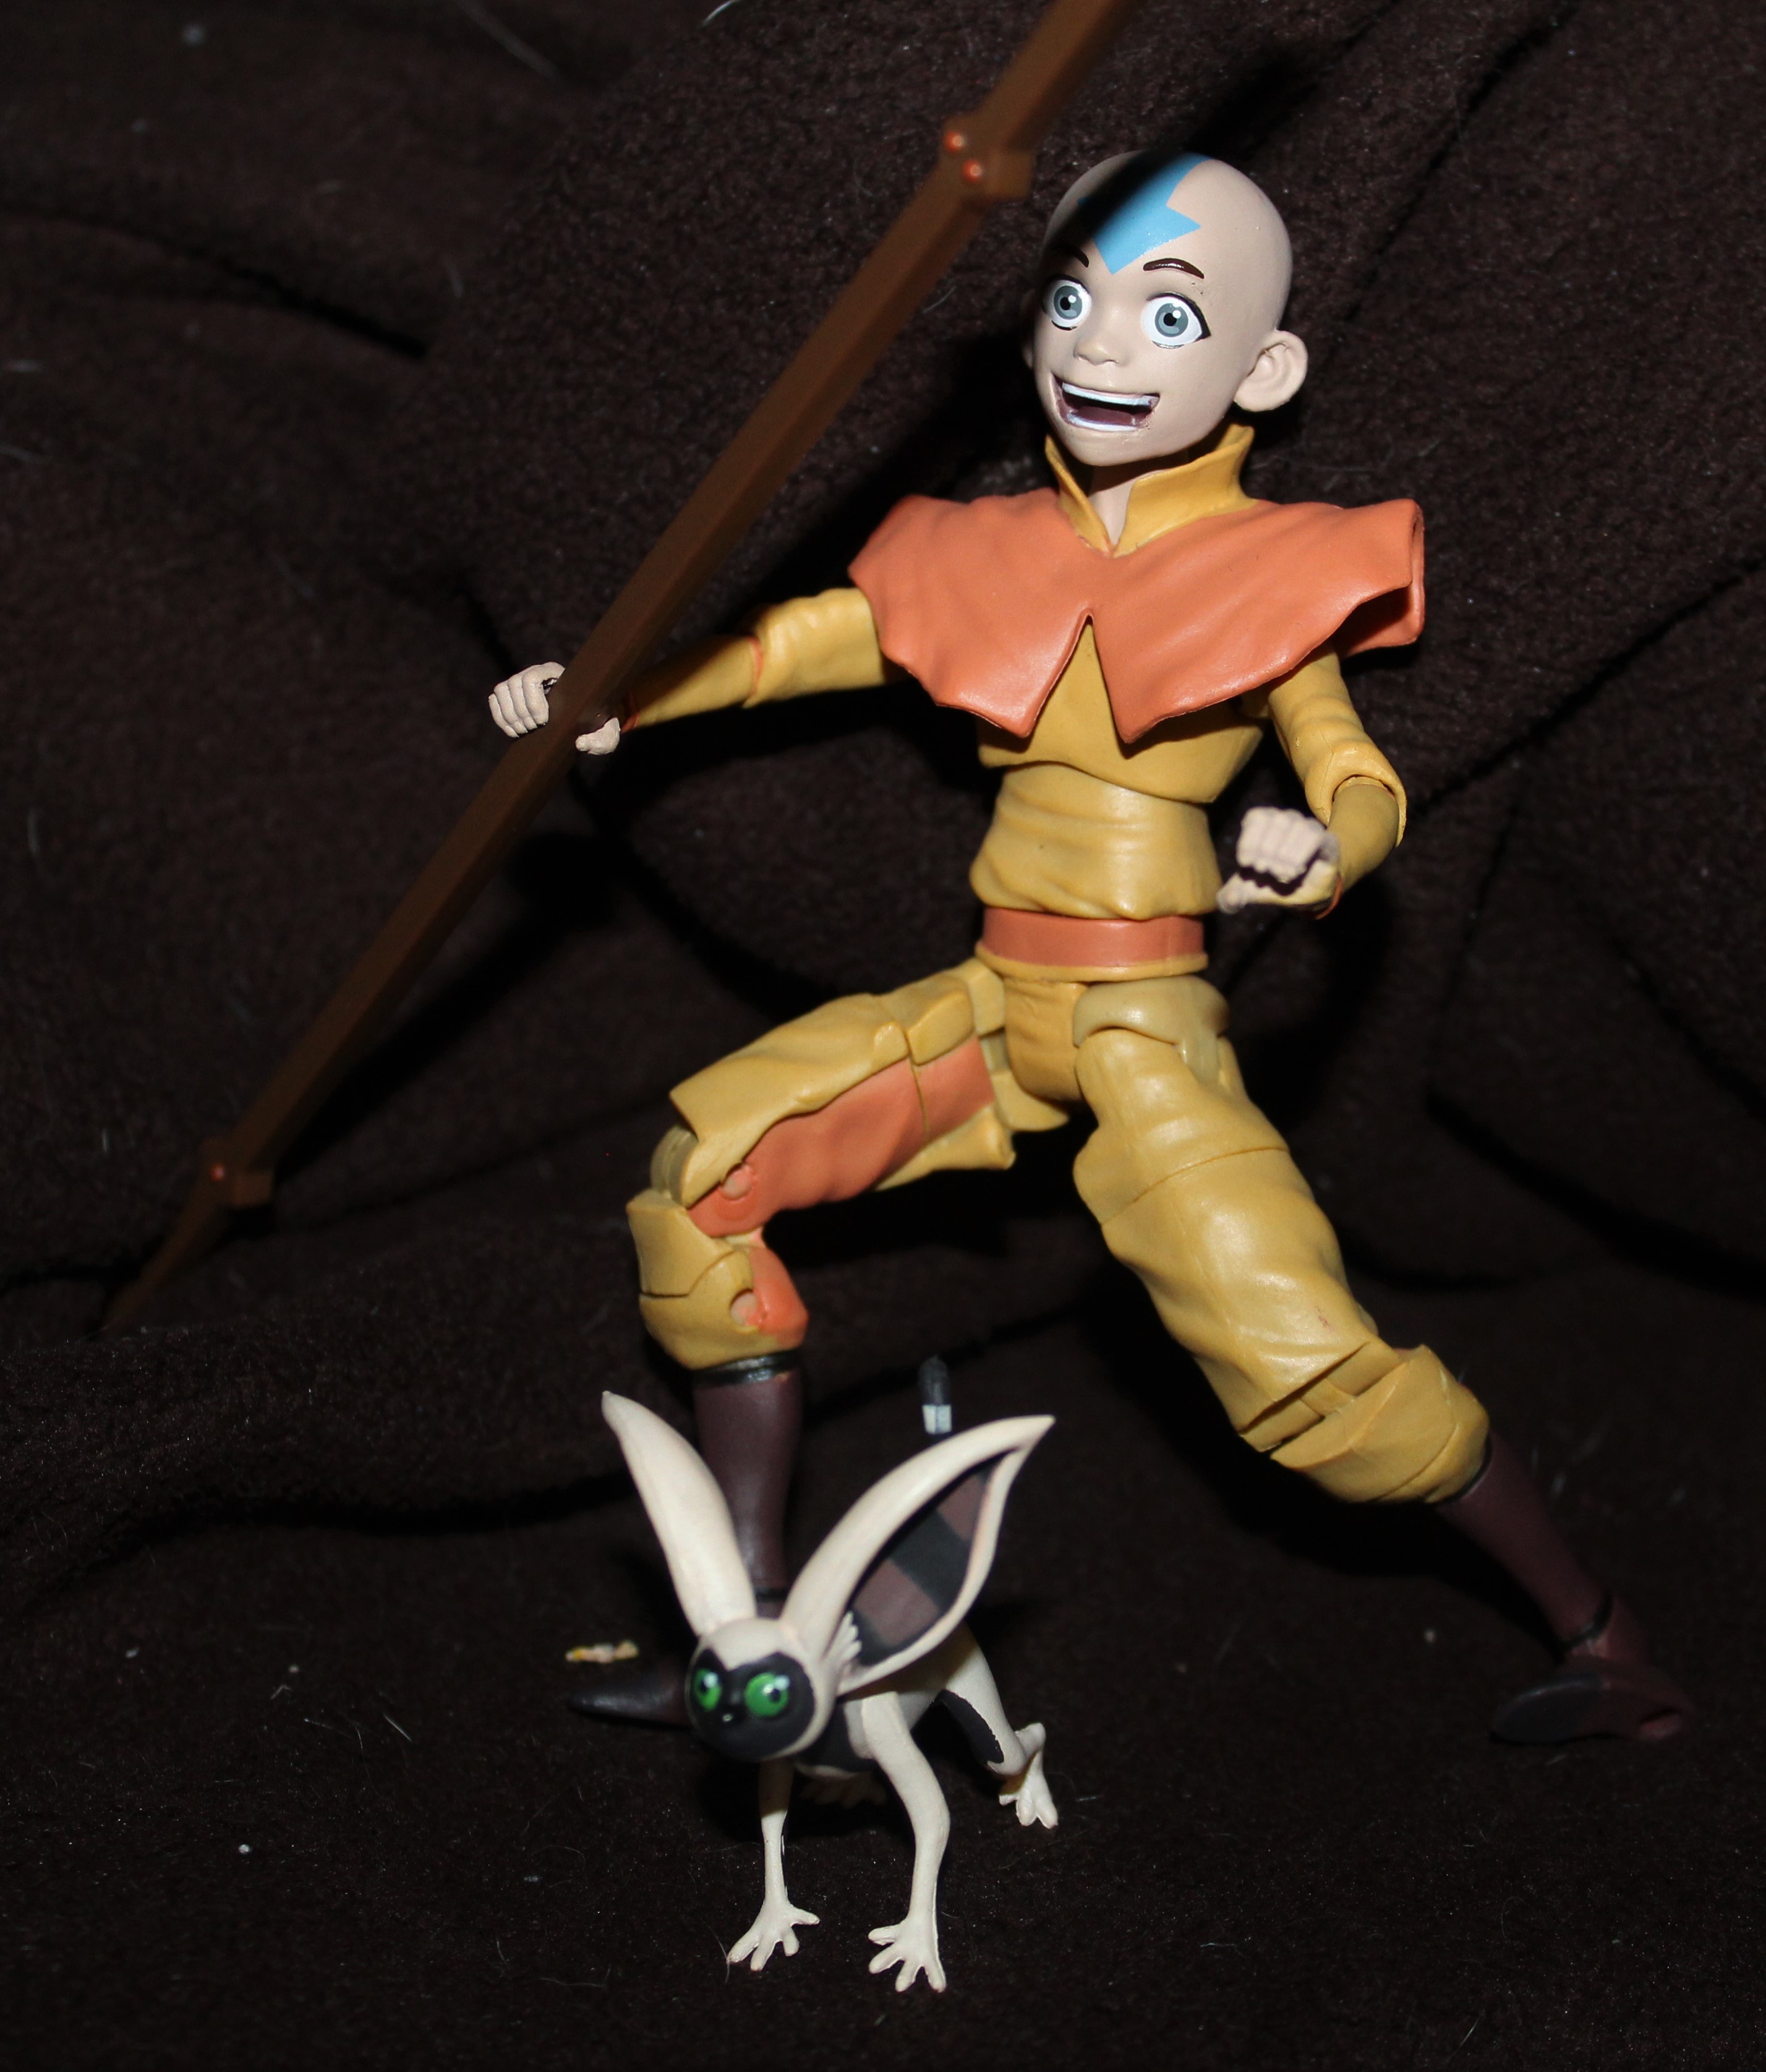 Aang staff fight